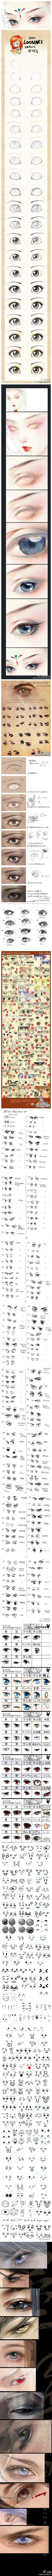 How to Draw Eyes- I am not an artist, but this is...